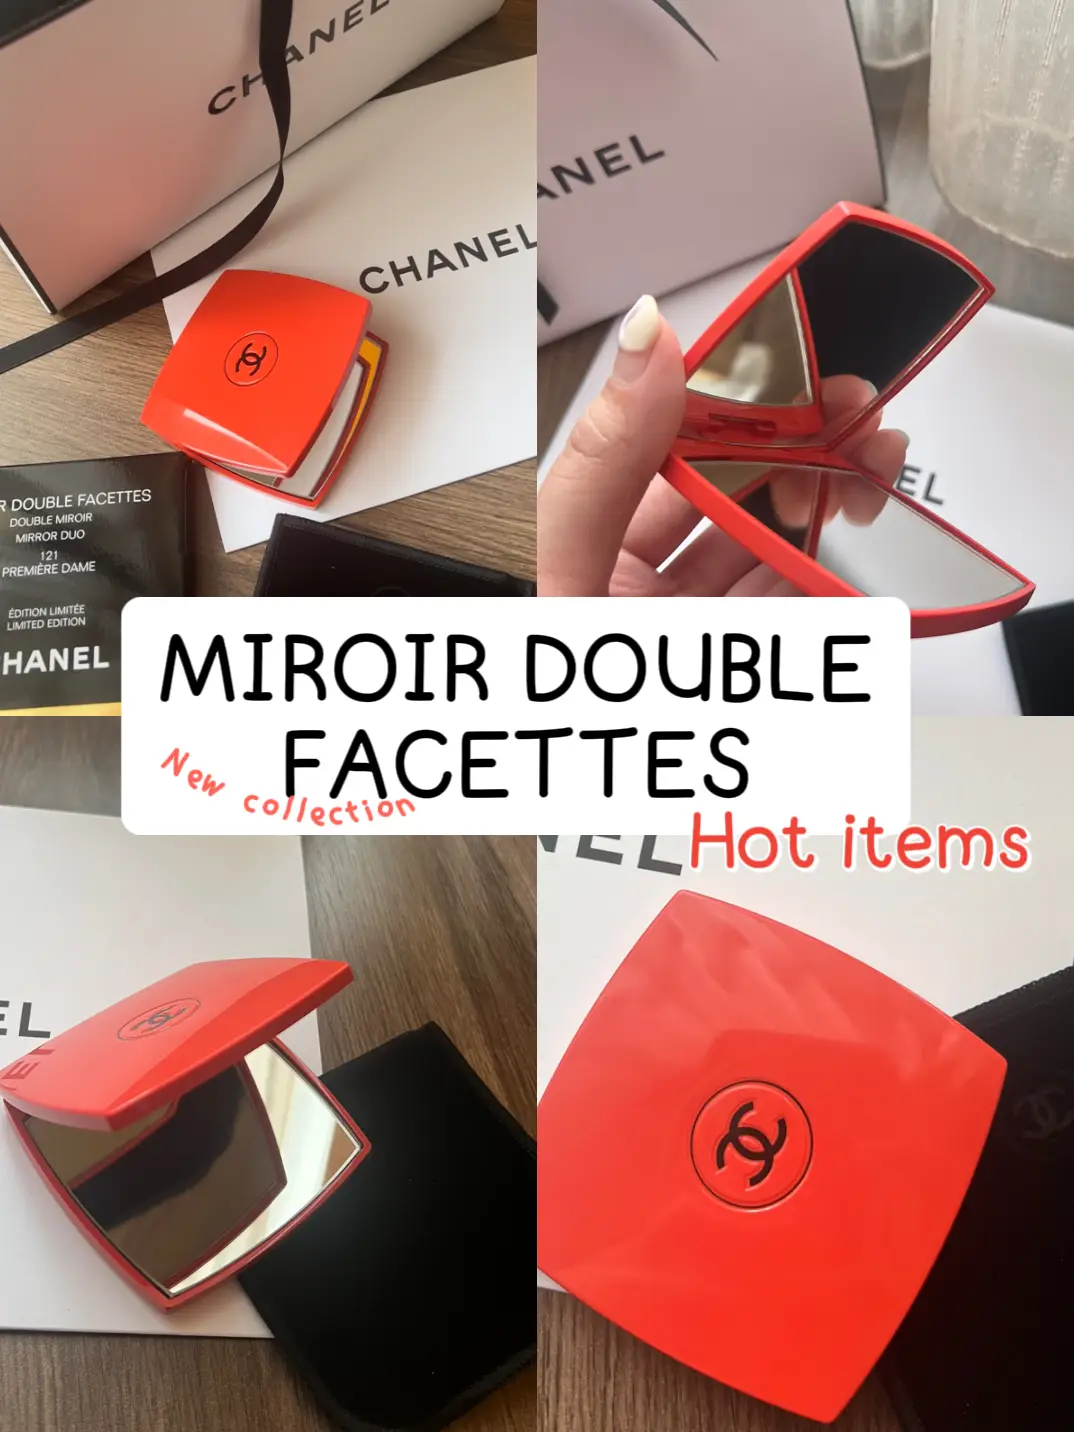 MIROIR DOUBLEFACETTES FROM Chanel, Gallery posted by fon